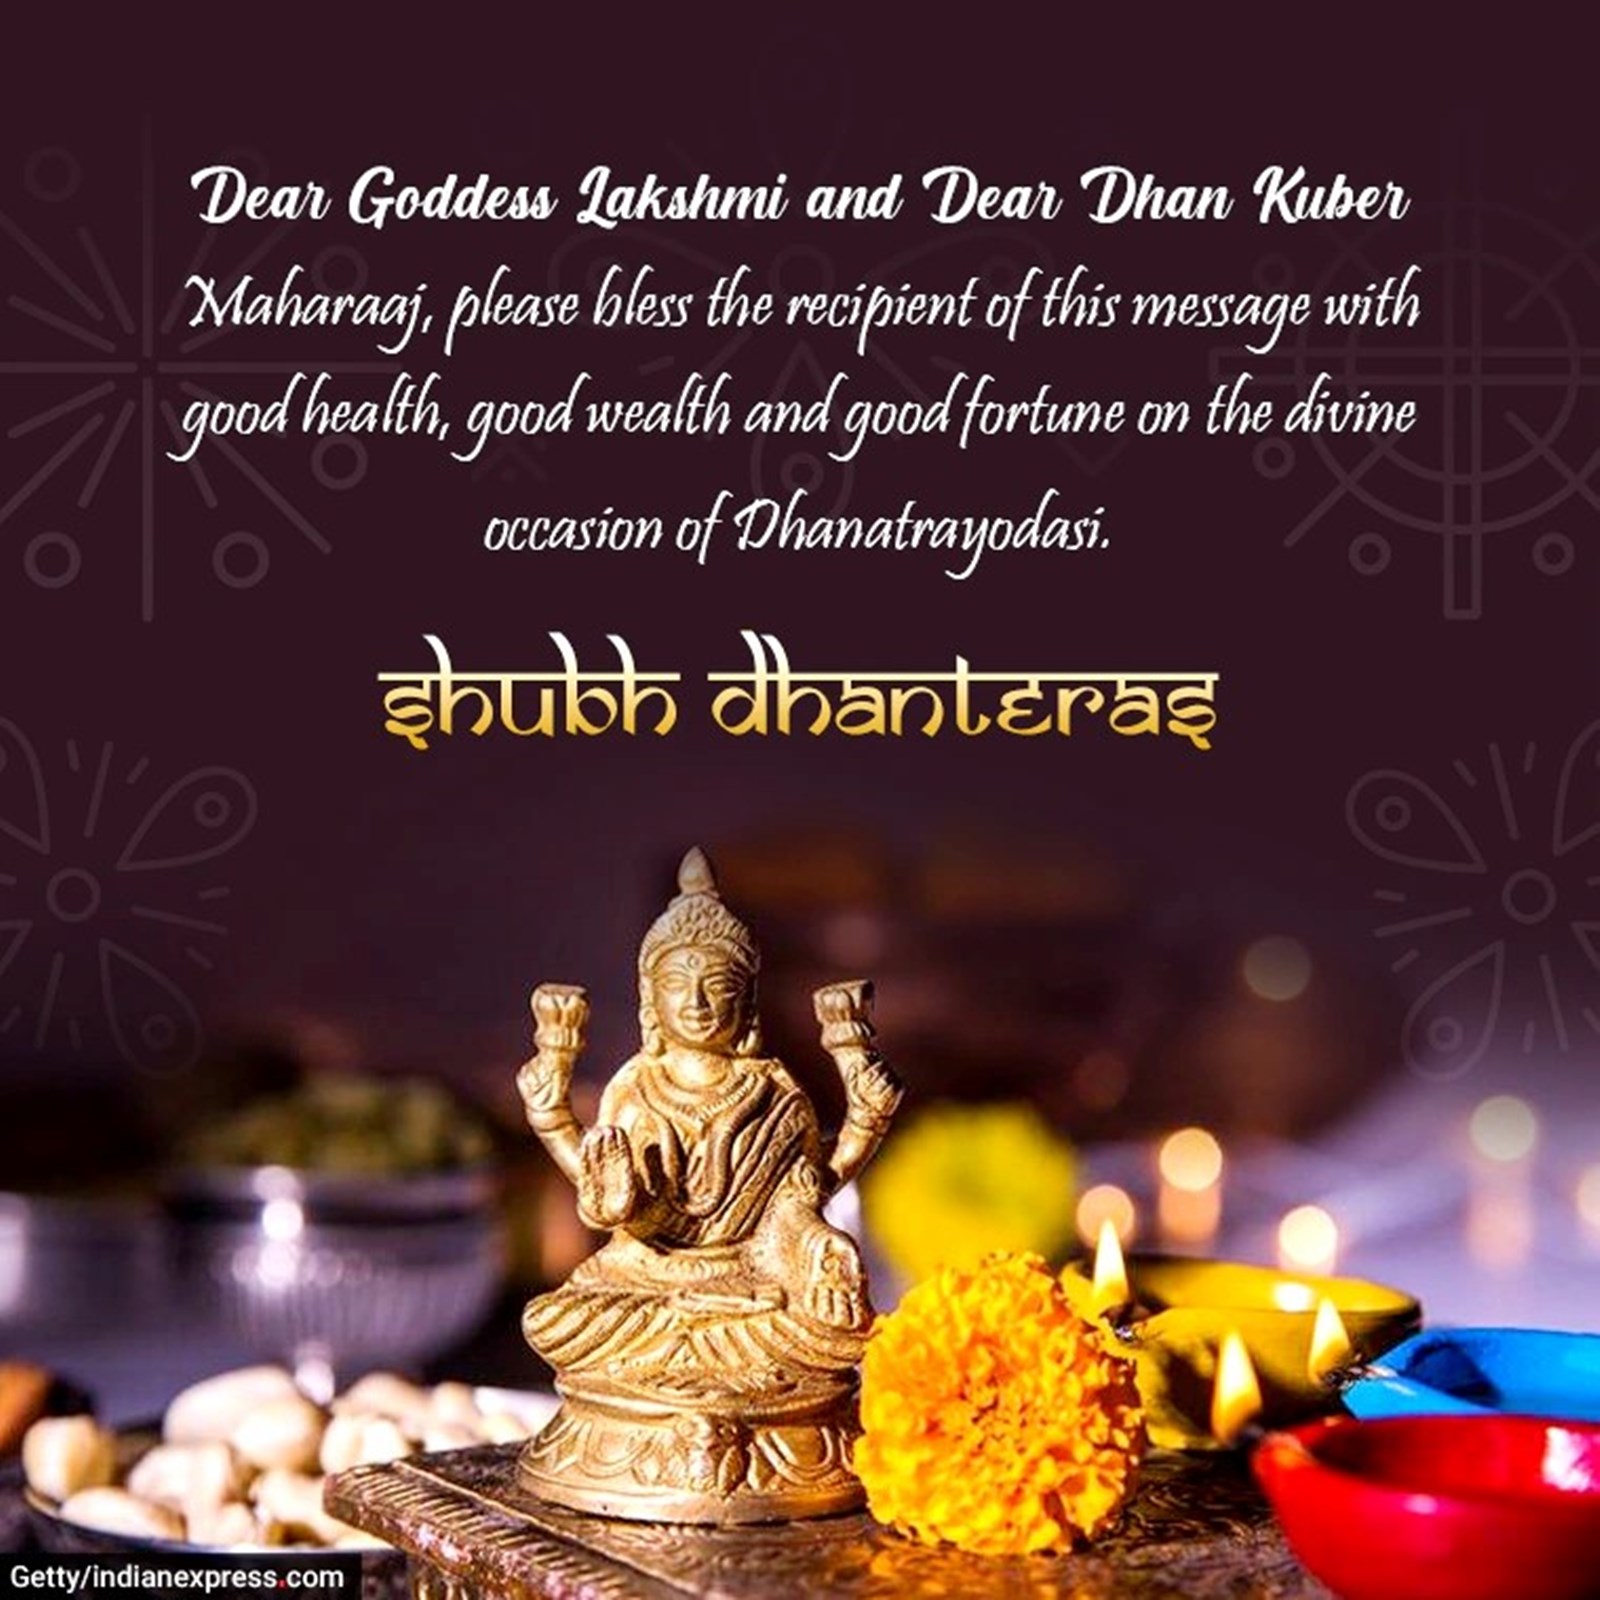 Happy Dhanteras 2023 Wishes, images, status, quotes, messages, photos